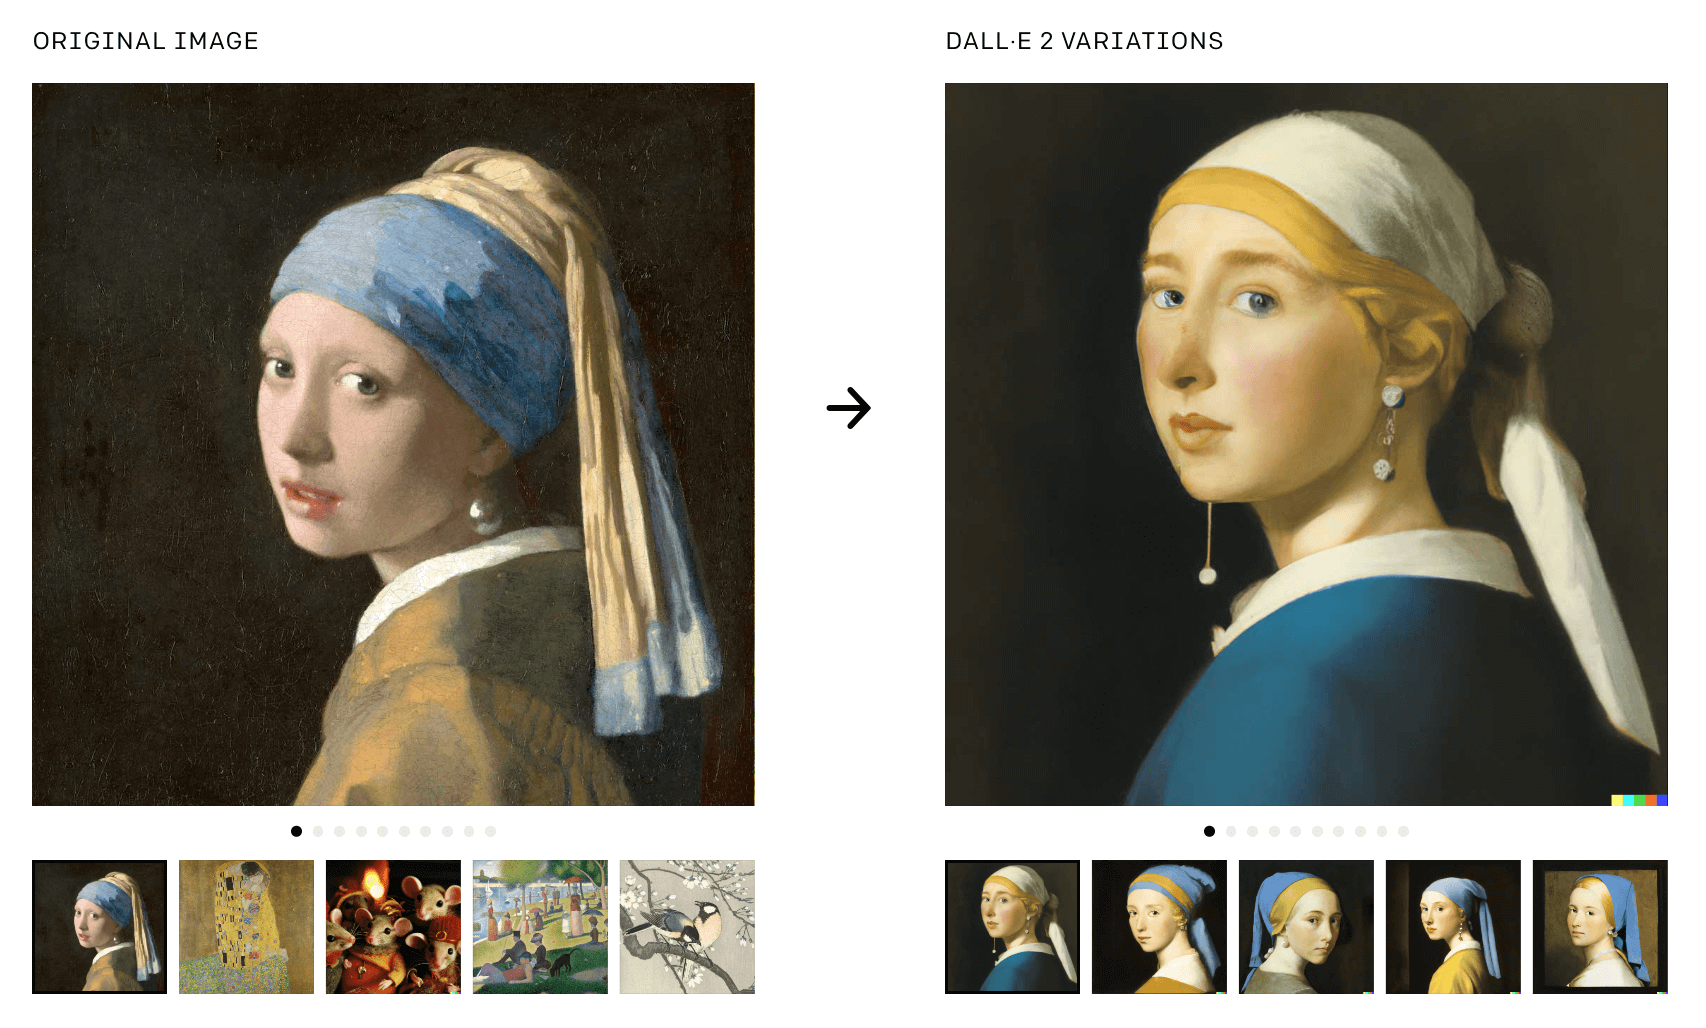 An example of what Dall-E 2, the image-generation AI, can do with an artist-created input.